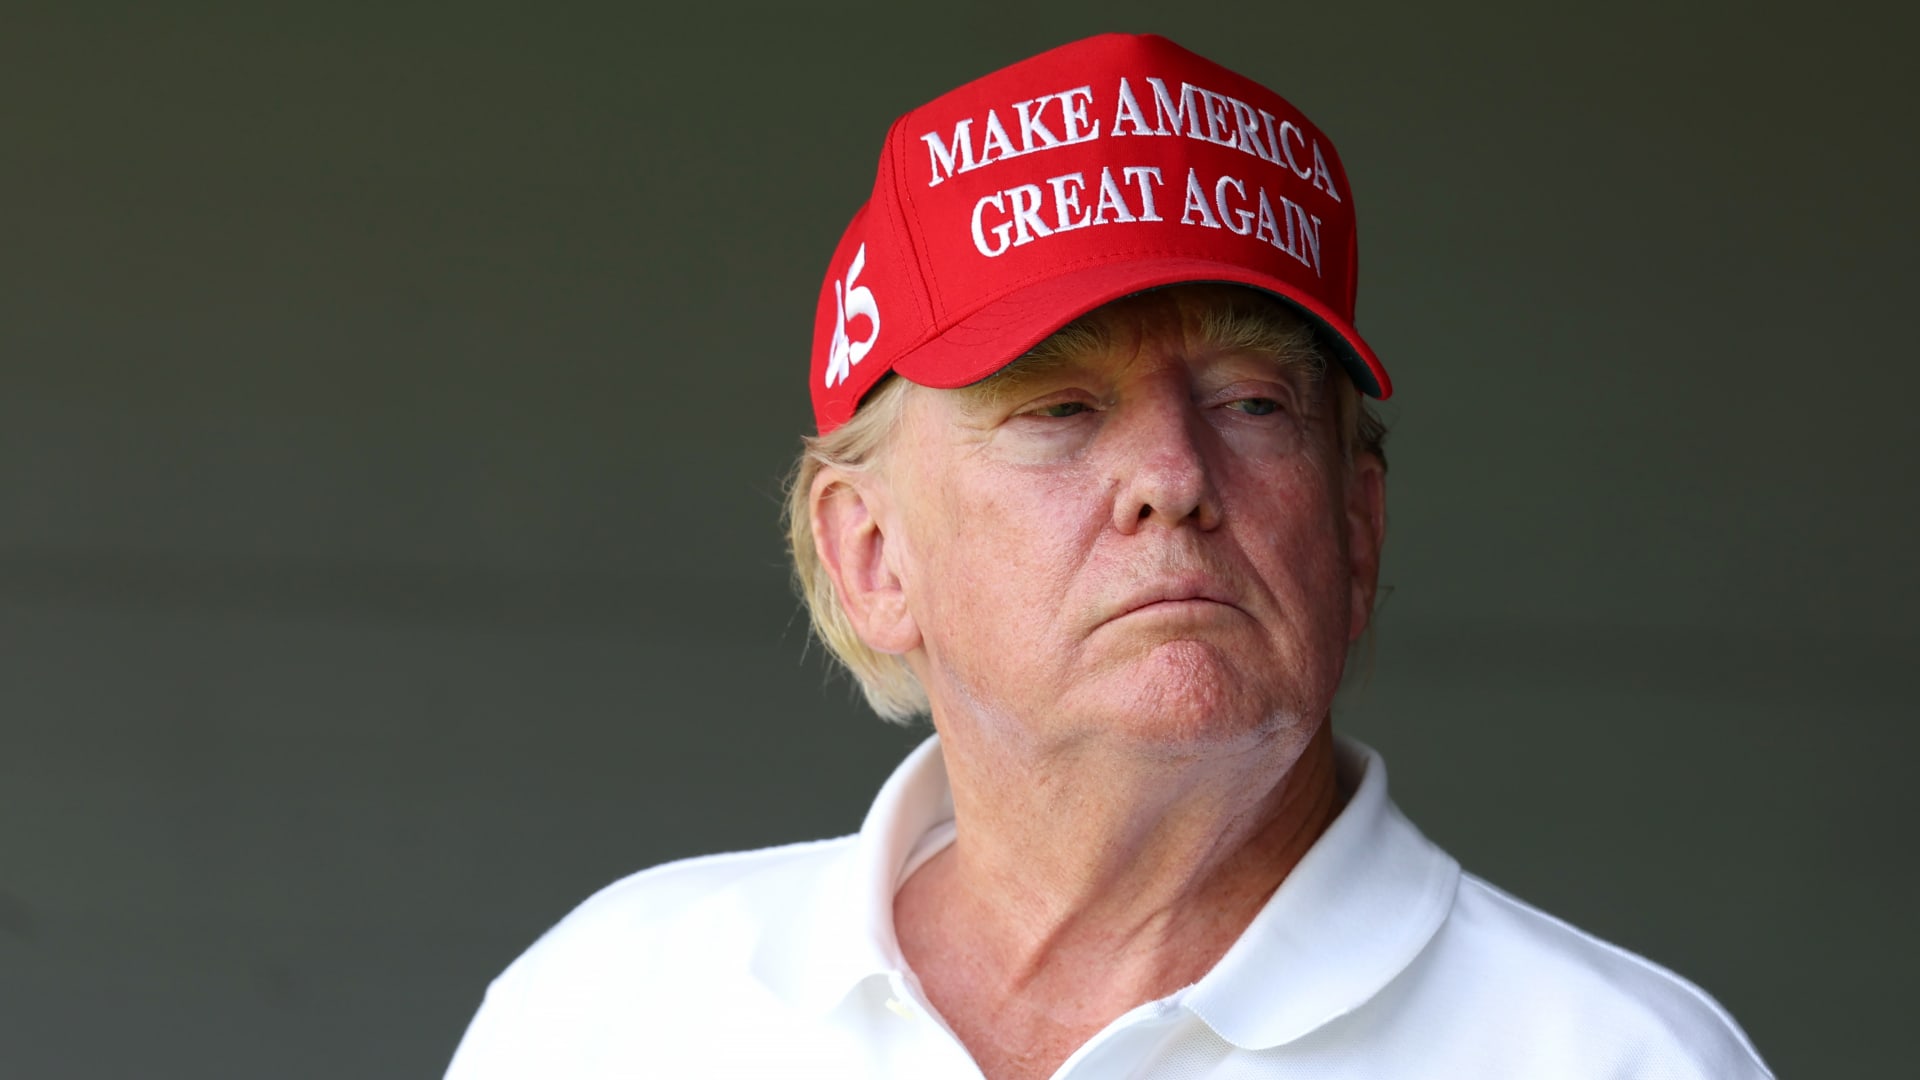 Former U.S. President Donald Trump visits the driving range, meets fans and watches round 2 of LIV Golf DC at the Trump National Golf Club, Washington, D.C., in Sterling, Virginia, May 27, 2023.